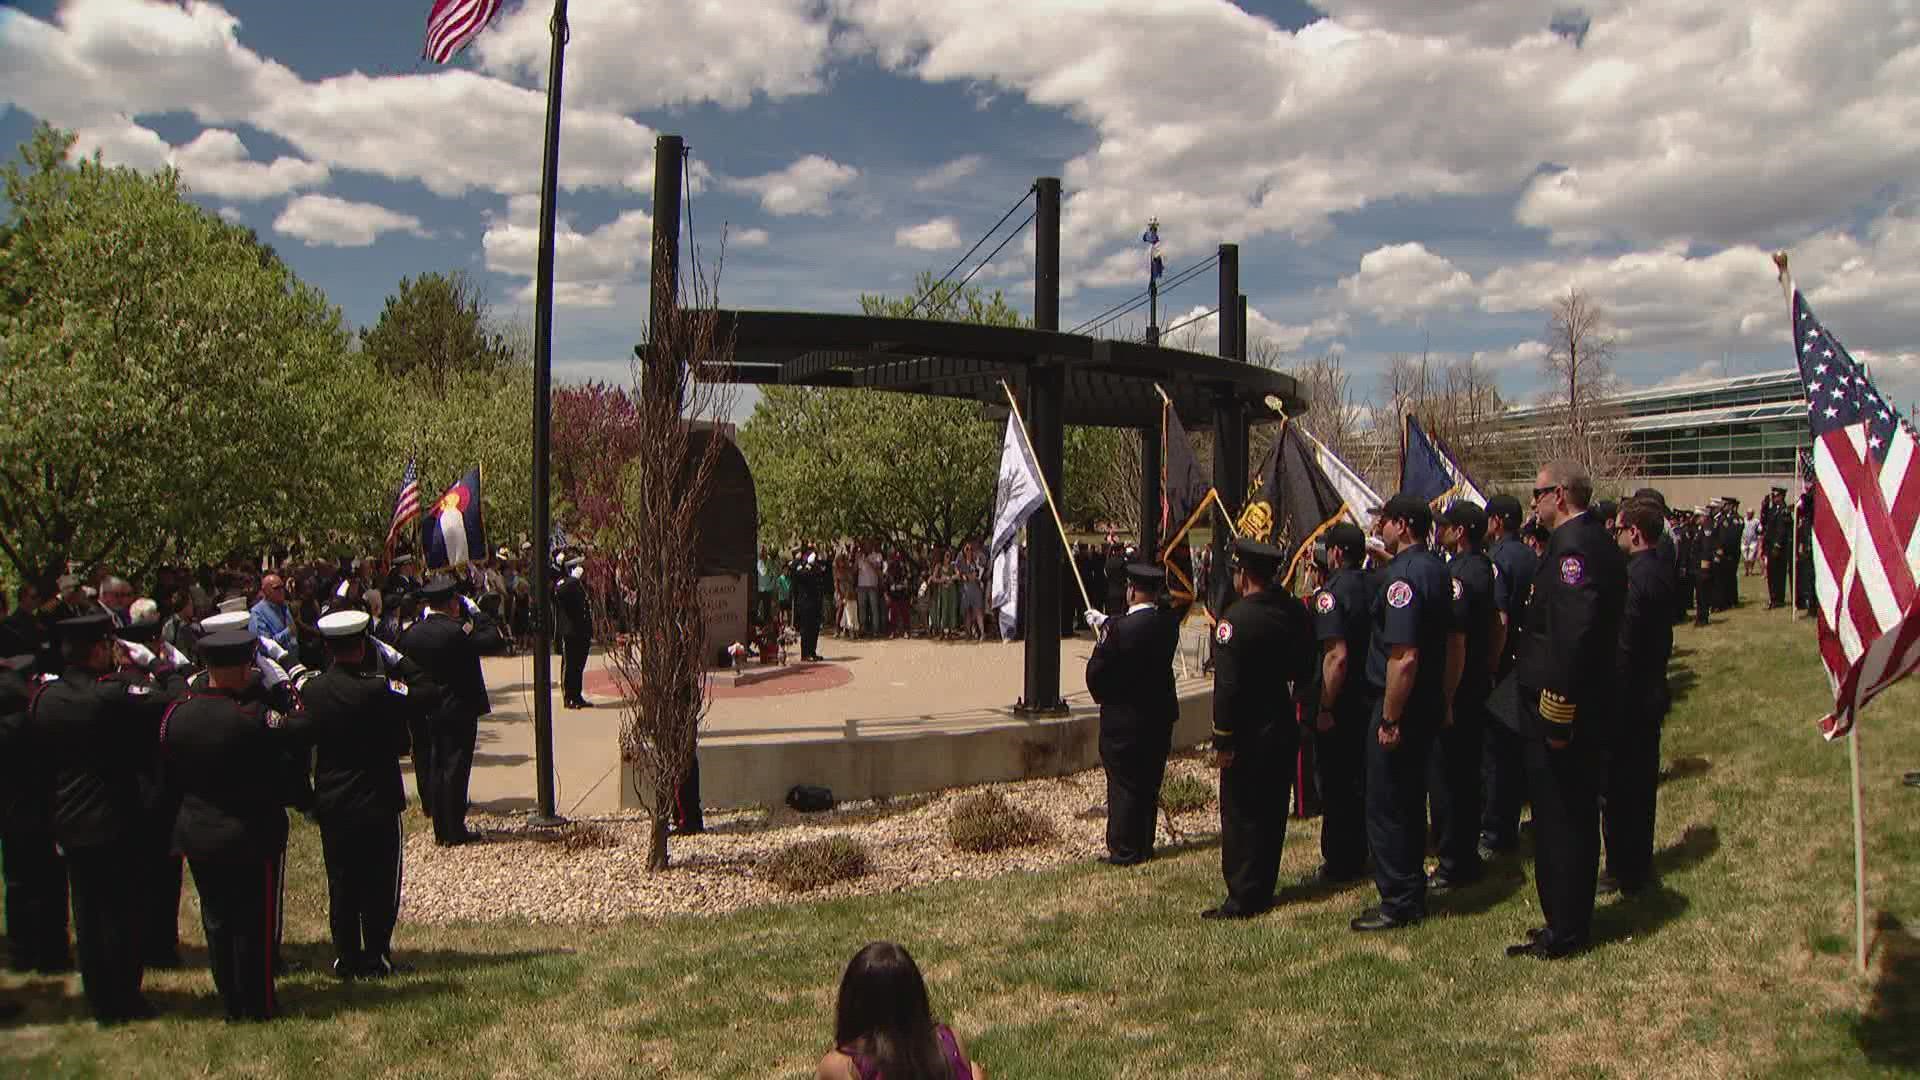 Sixteen names have been added to the memorial in Lakewood.